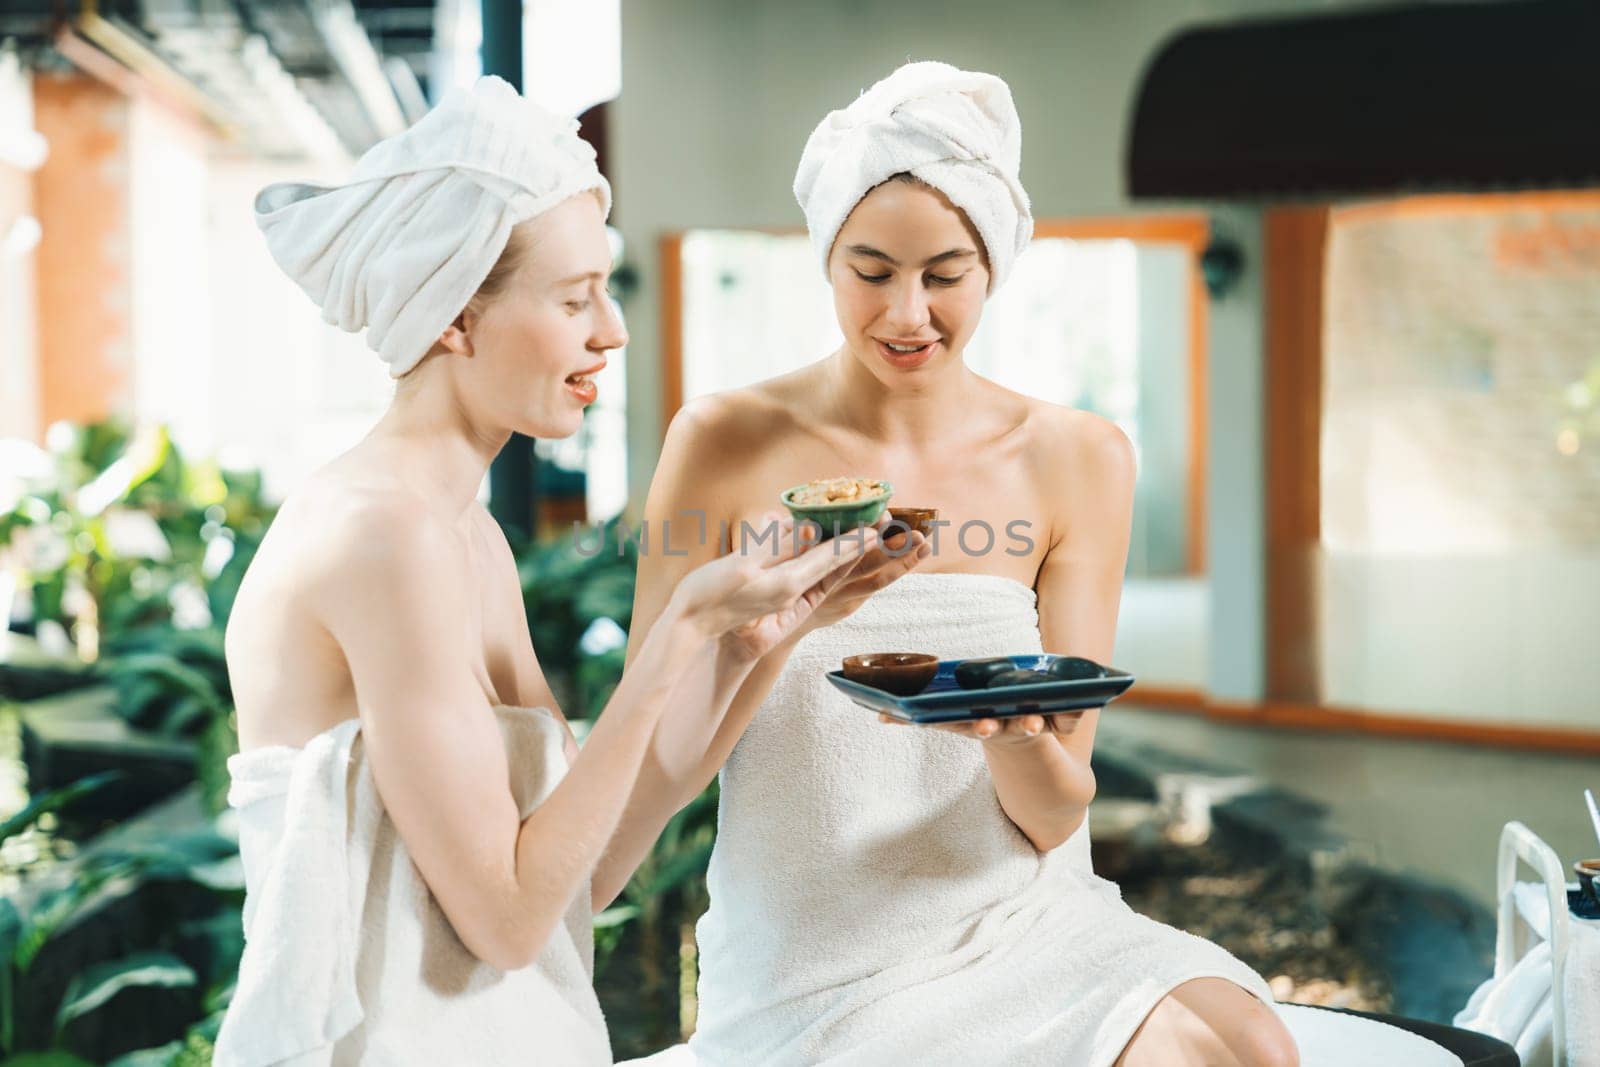 Couple of beautiful girls interested in homemade facial mask.Tranquility. by biancoblue